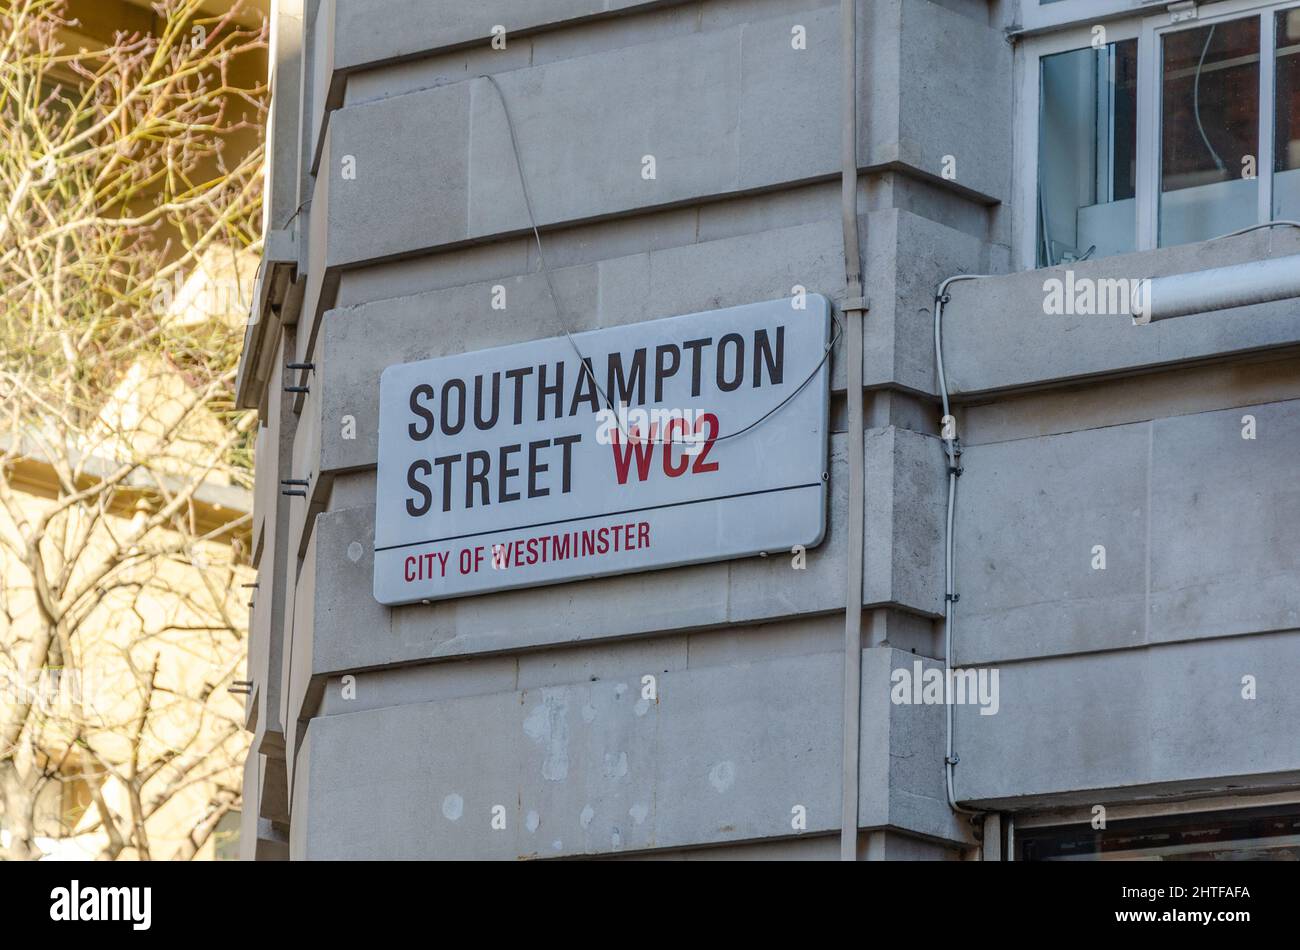 Street sign for Southampton Street in Covent Garden,City of Westminster, London, UK Stock Photo